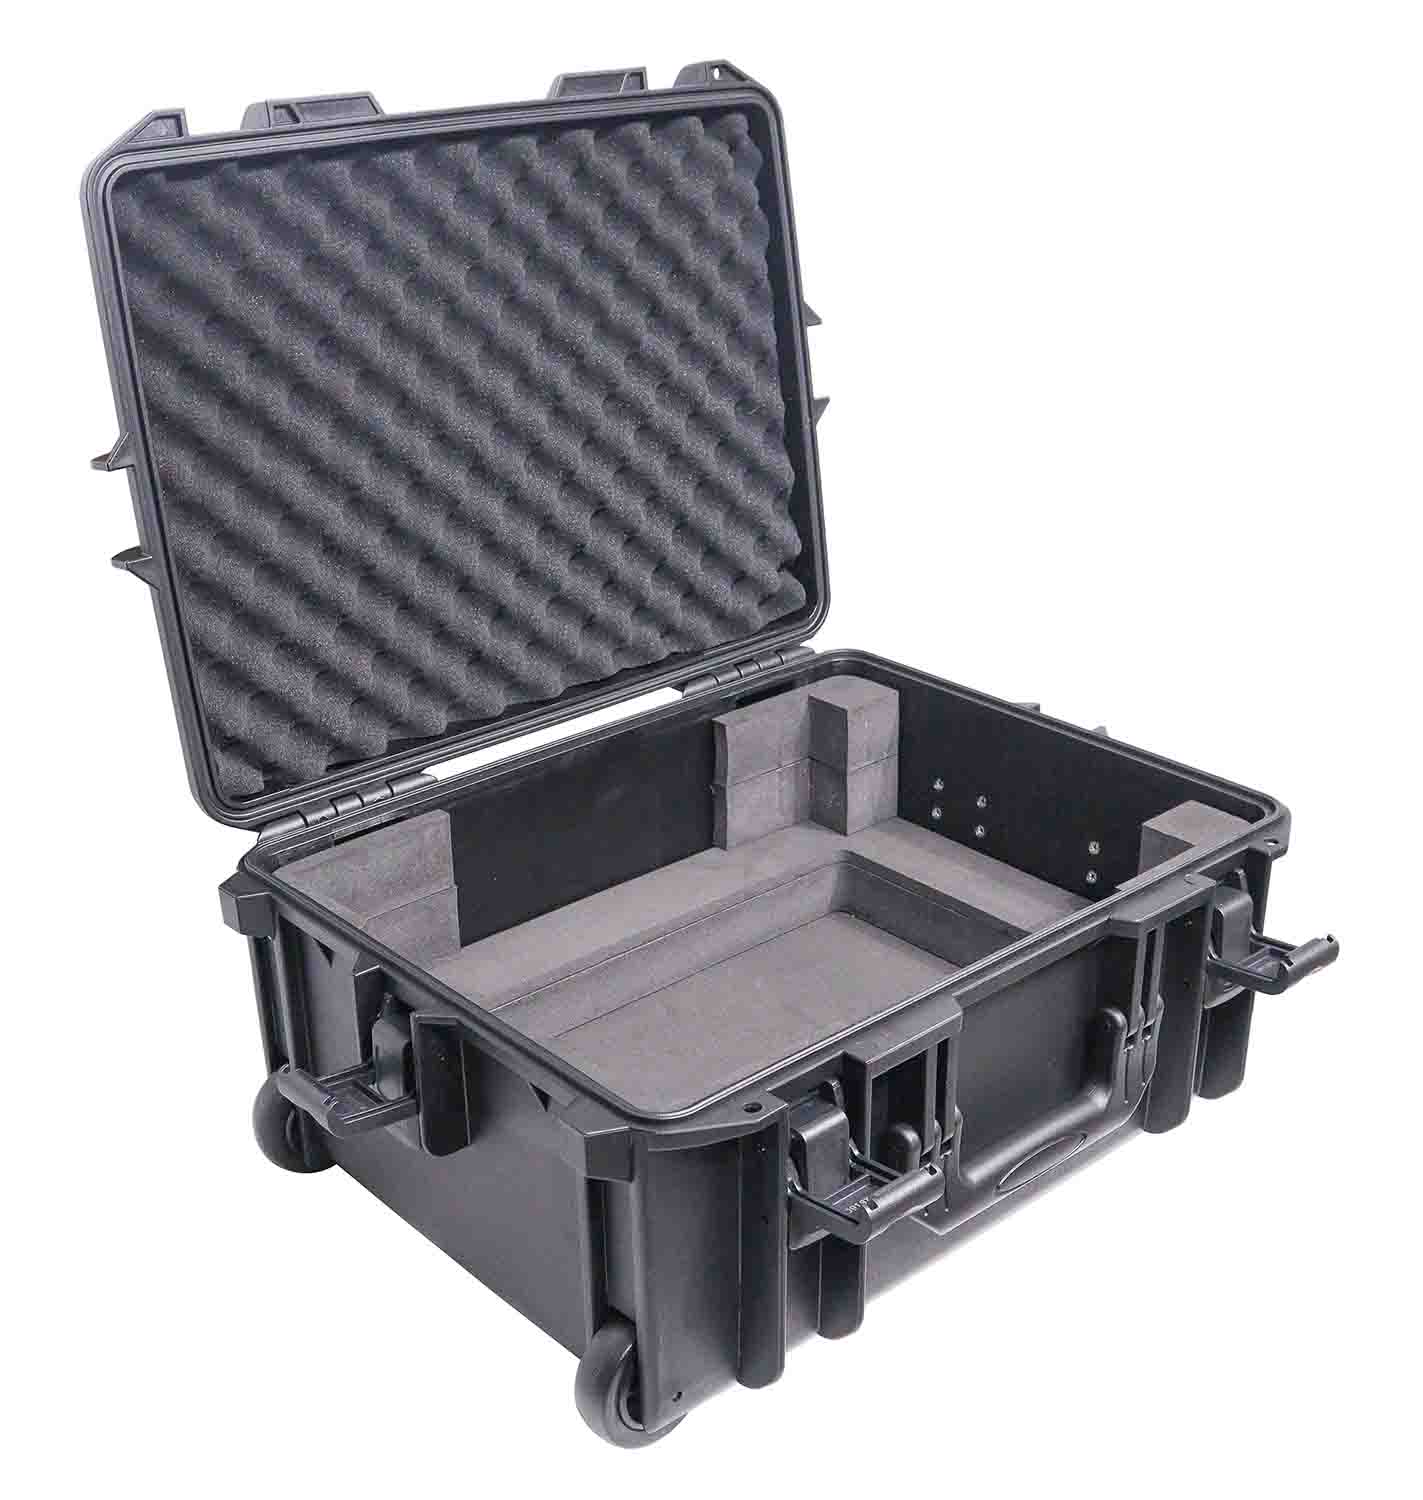 ProX XM-CDHW UltronX Watertight Case Holds CDJ-3000 and 12 Inch Mixers with Handle and Wheels - Hollywood DJ